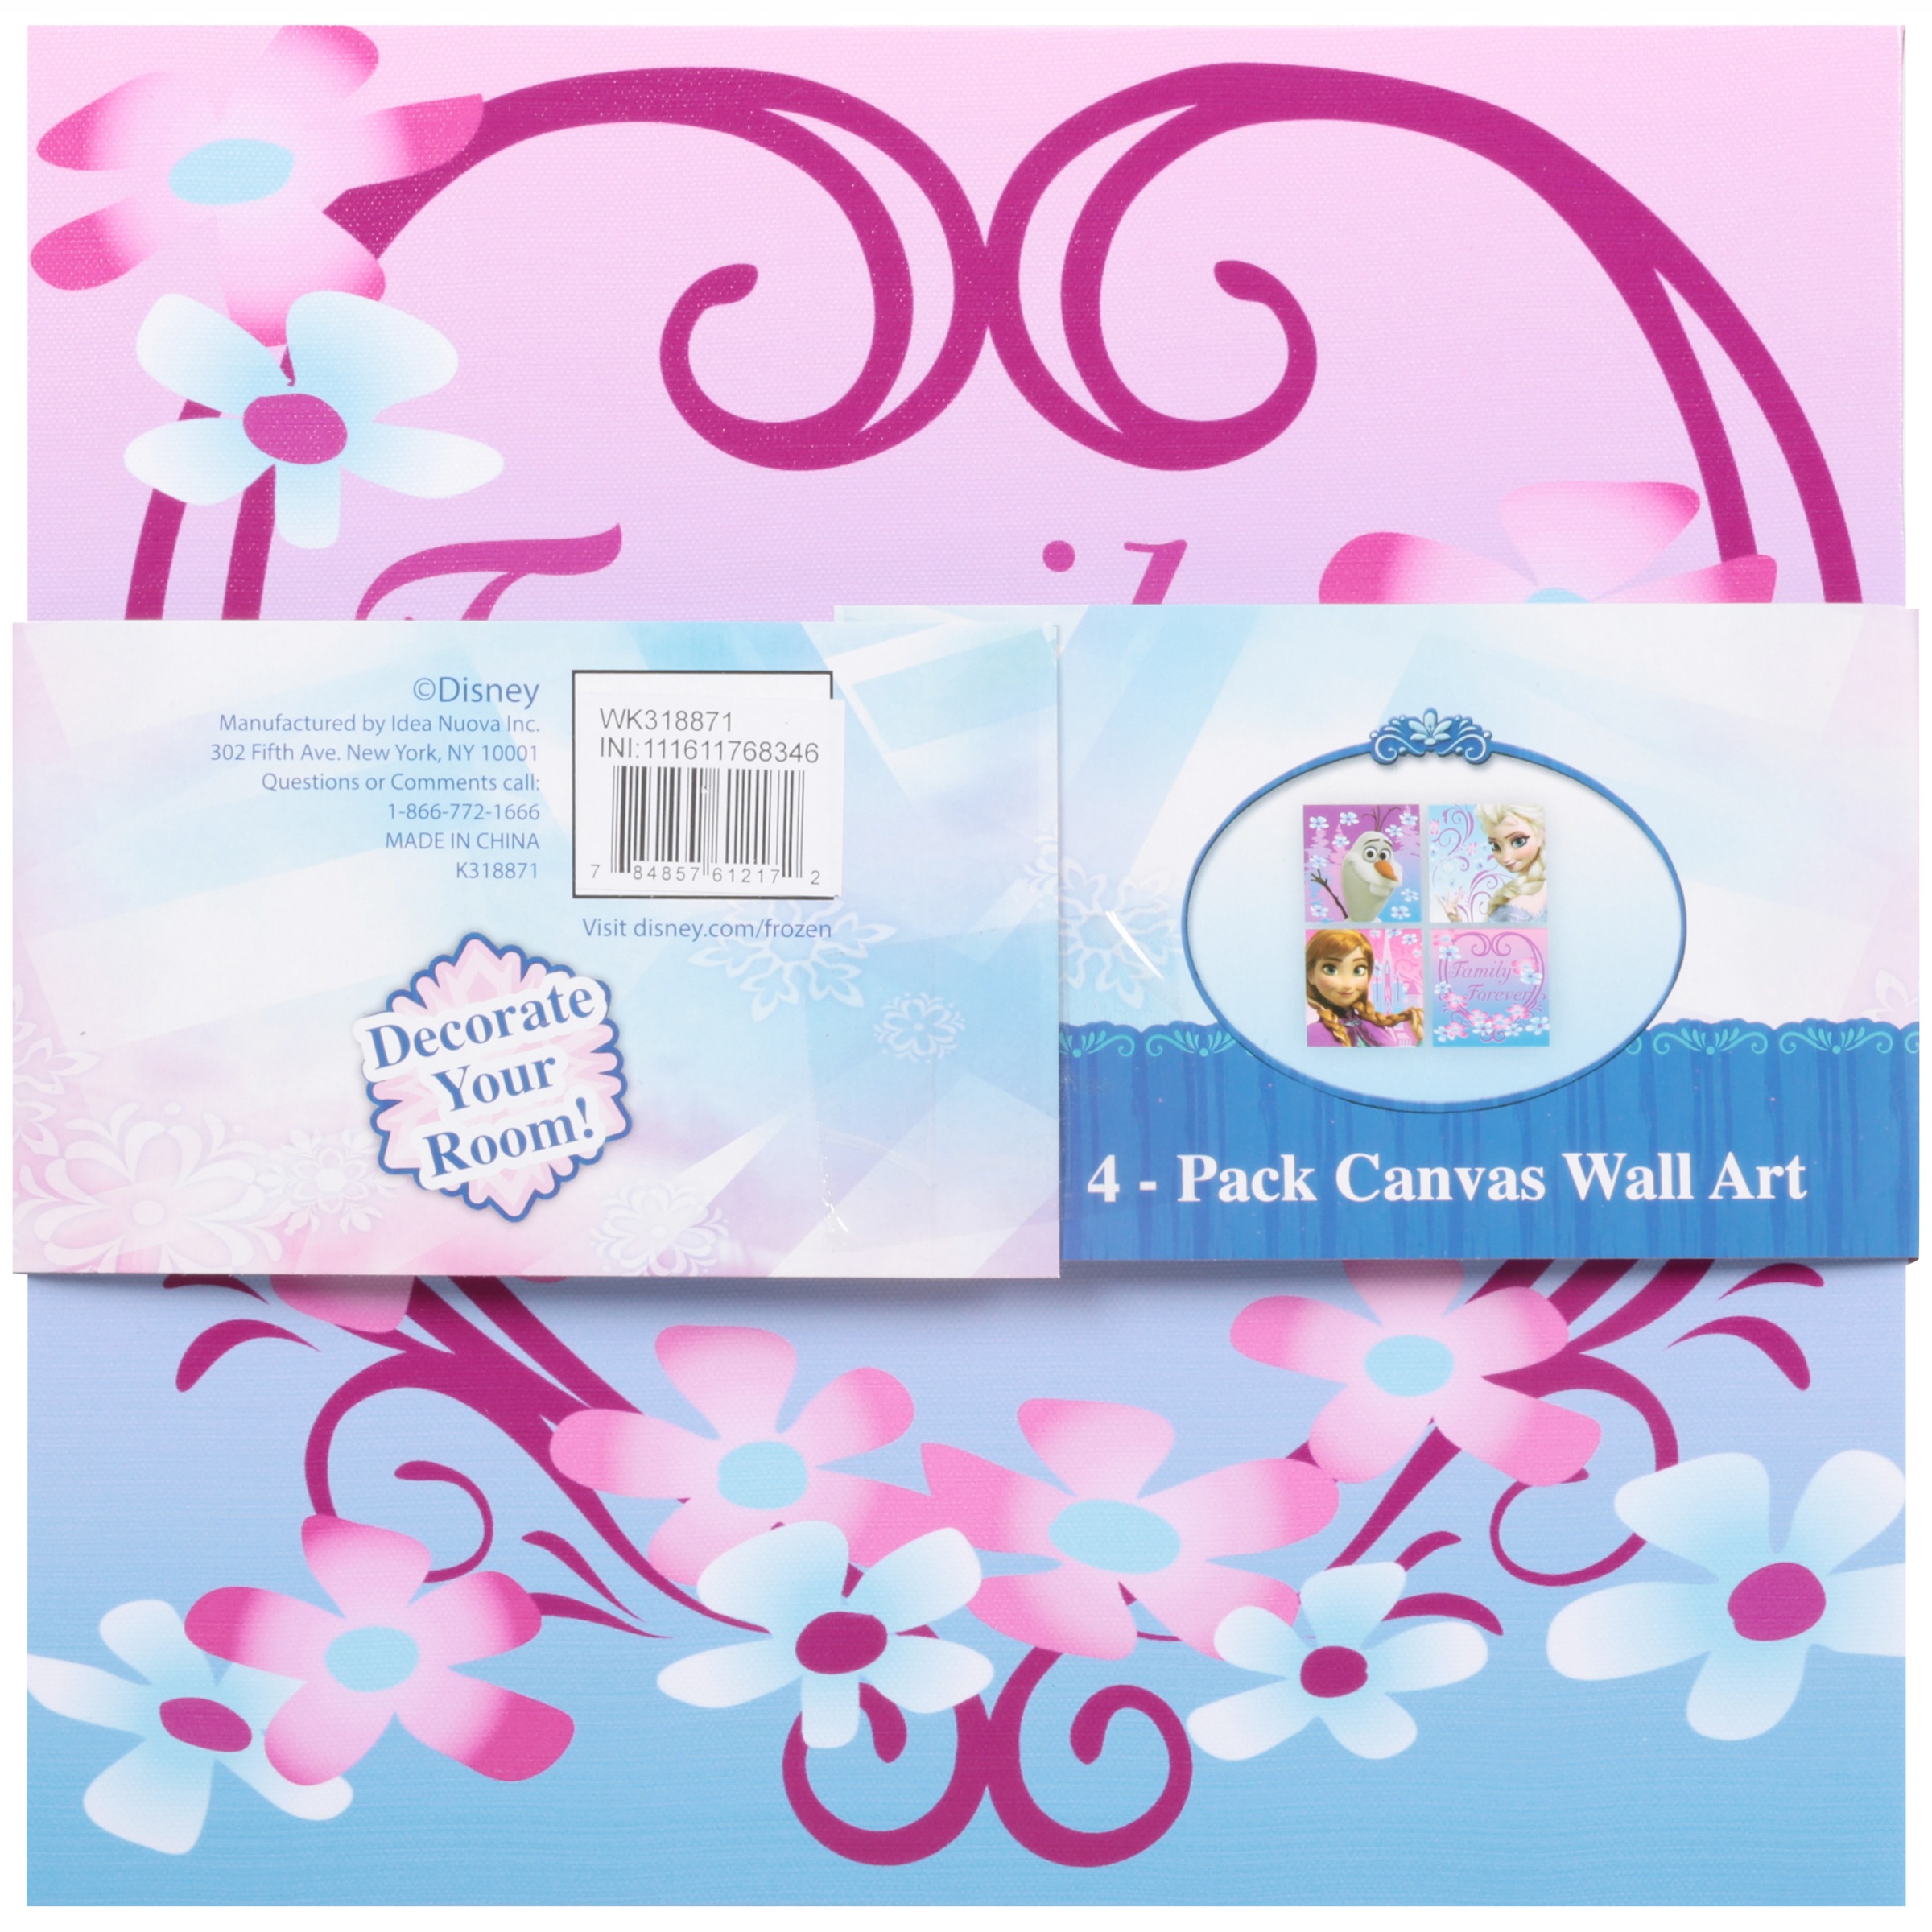 Disney Frozen Canvas Wall Art 4 pc Pack - image 3 of 4